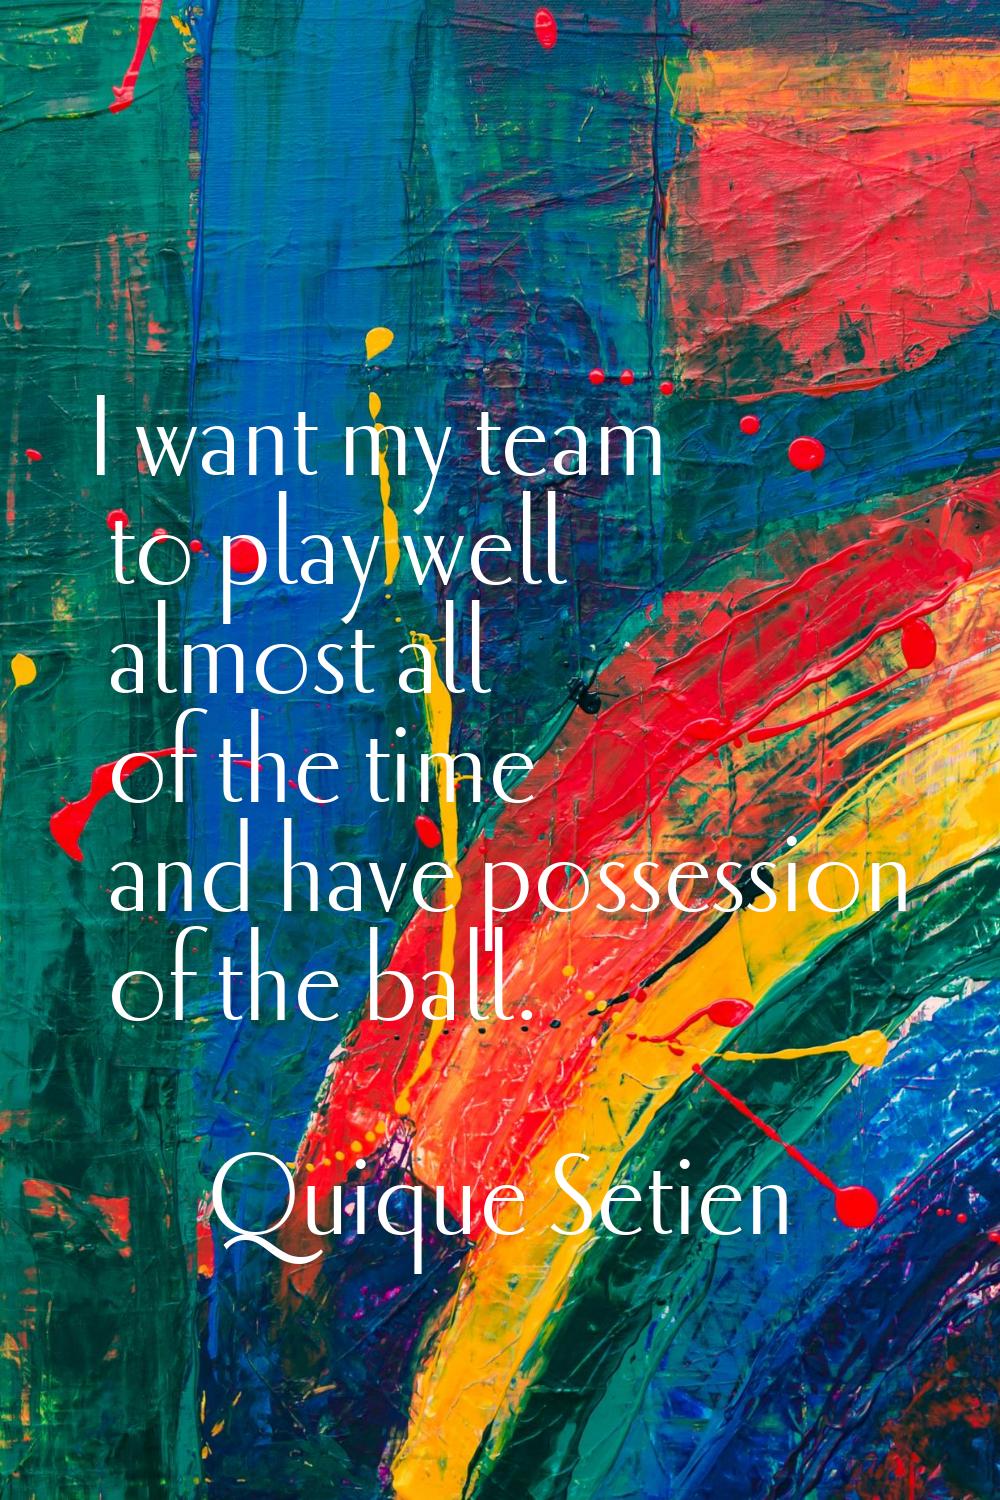 I want my team to play well almost all of the time and have possession of the ball.